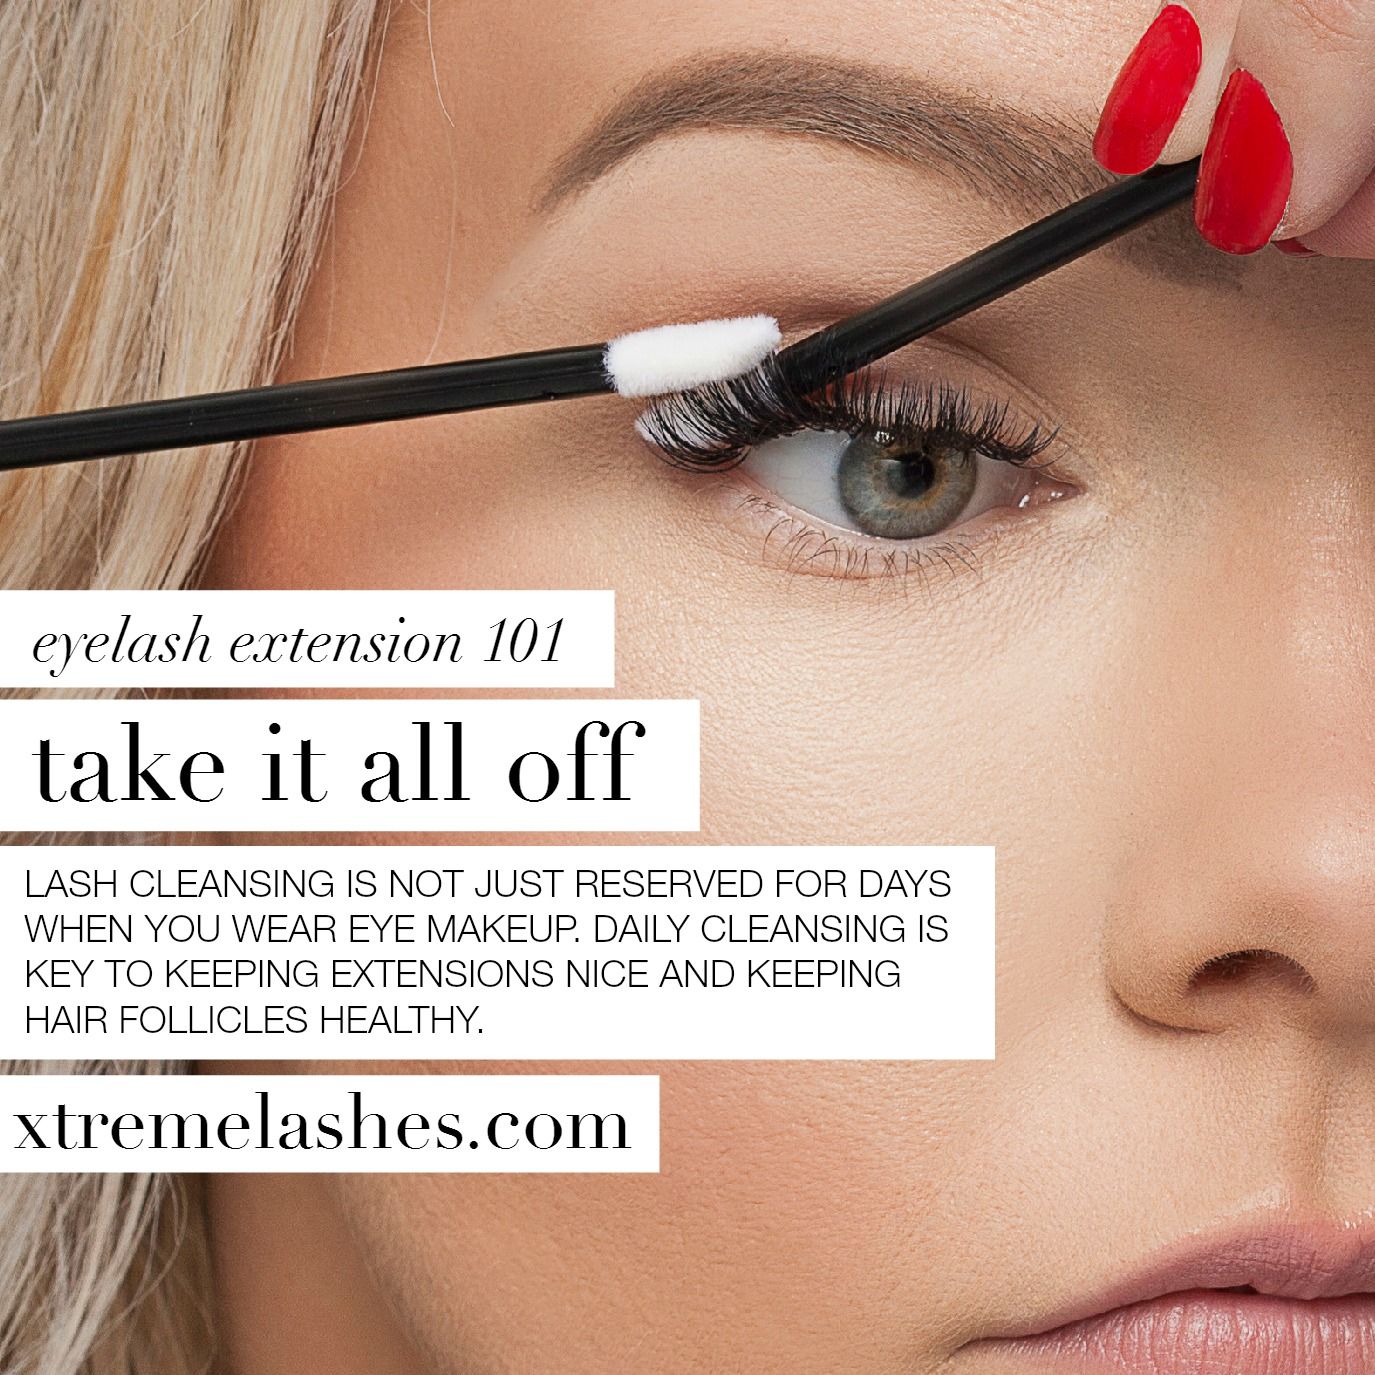 What To Wash Eyelash Extensions With